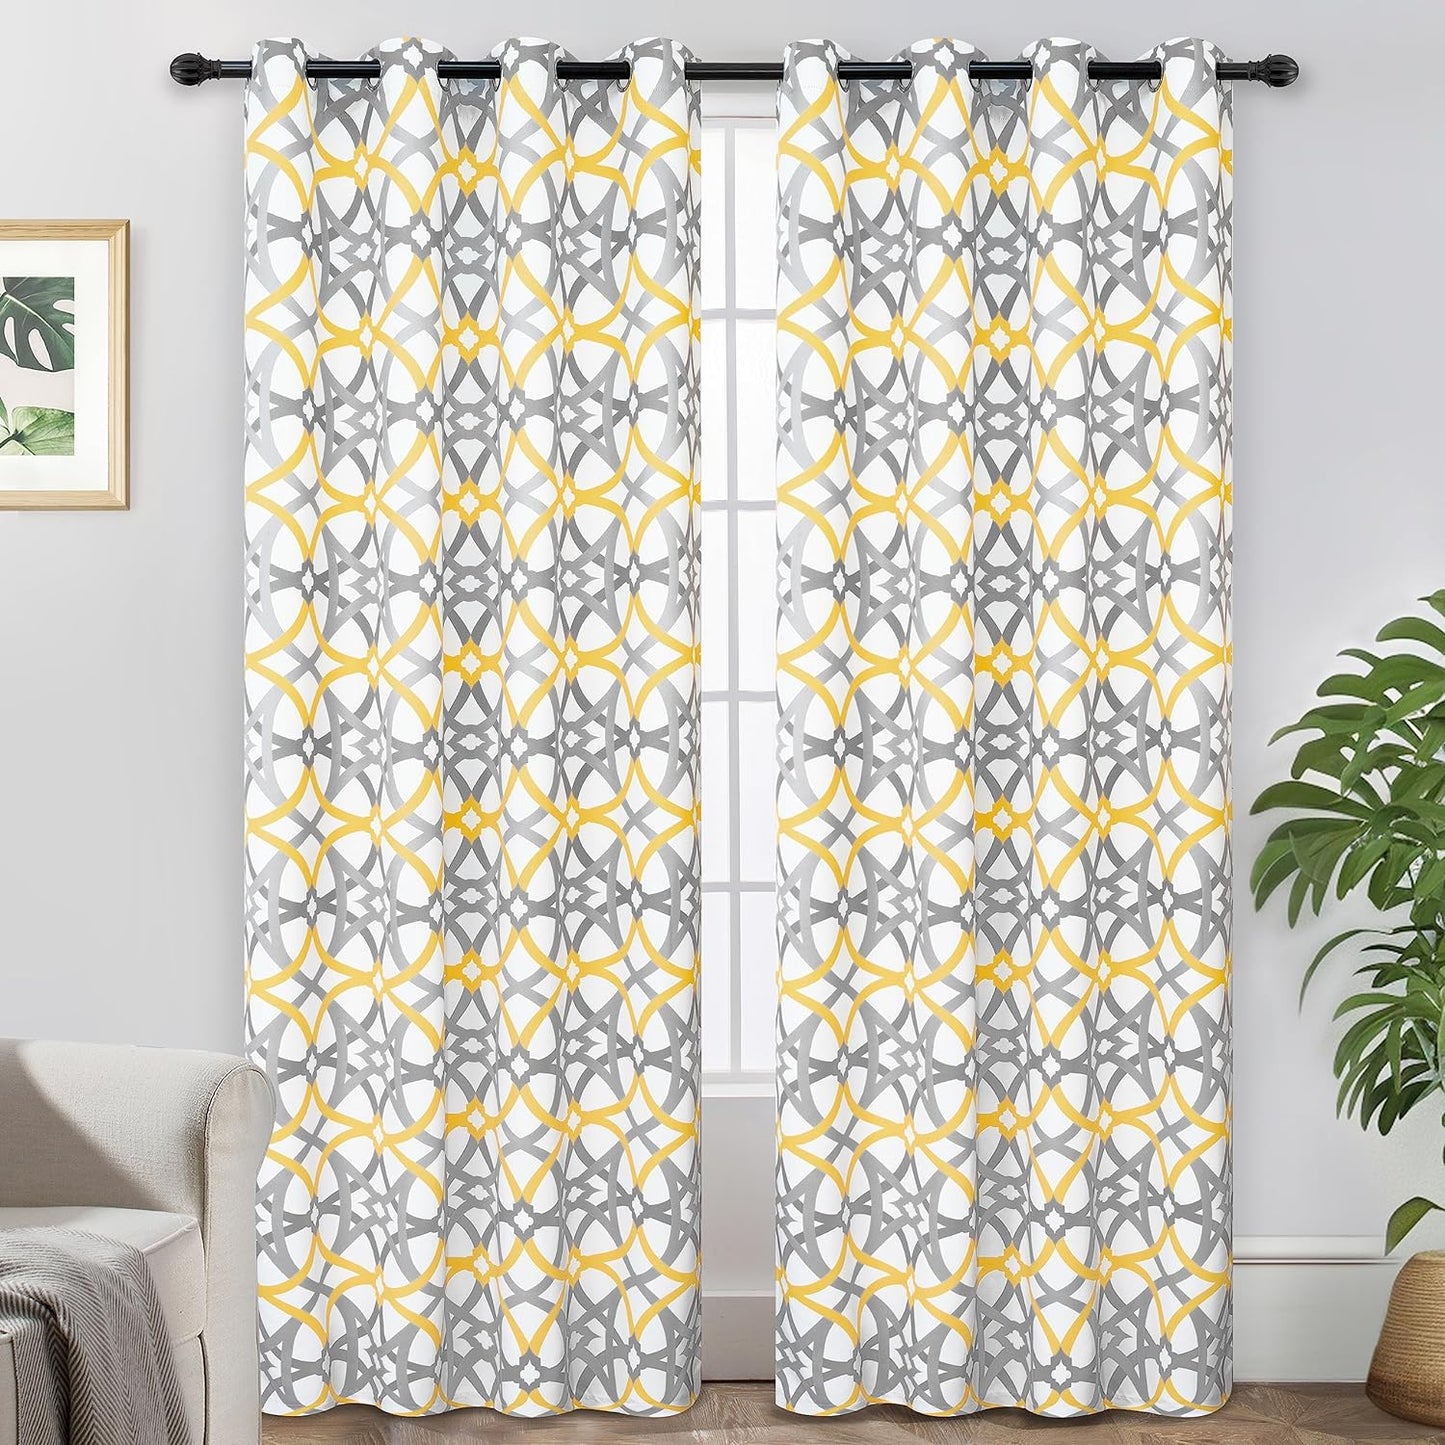 Driftaway Alexander Thermal Blackout Grommet Unlined Window Curtains Spiral Geo Trellis Pattern Set of 2 Panels Each Size 52 Inch by 84 Inch Red and Gray  DriftAway Golden Yellow/Gray 52"X102" 